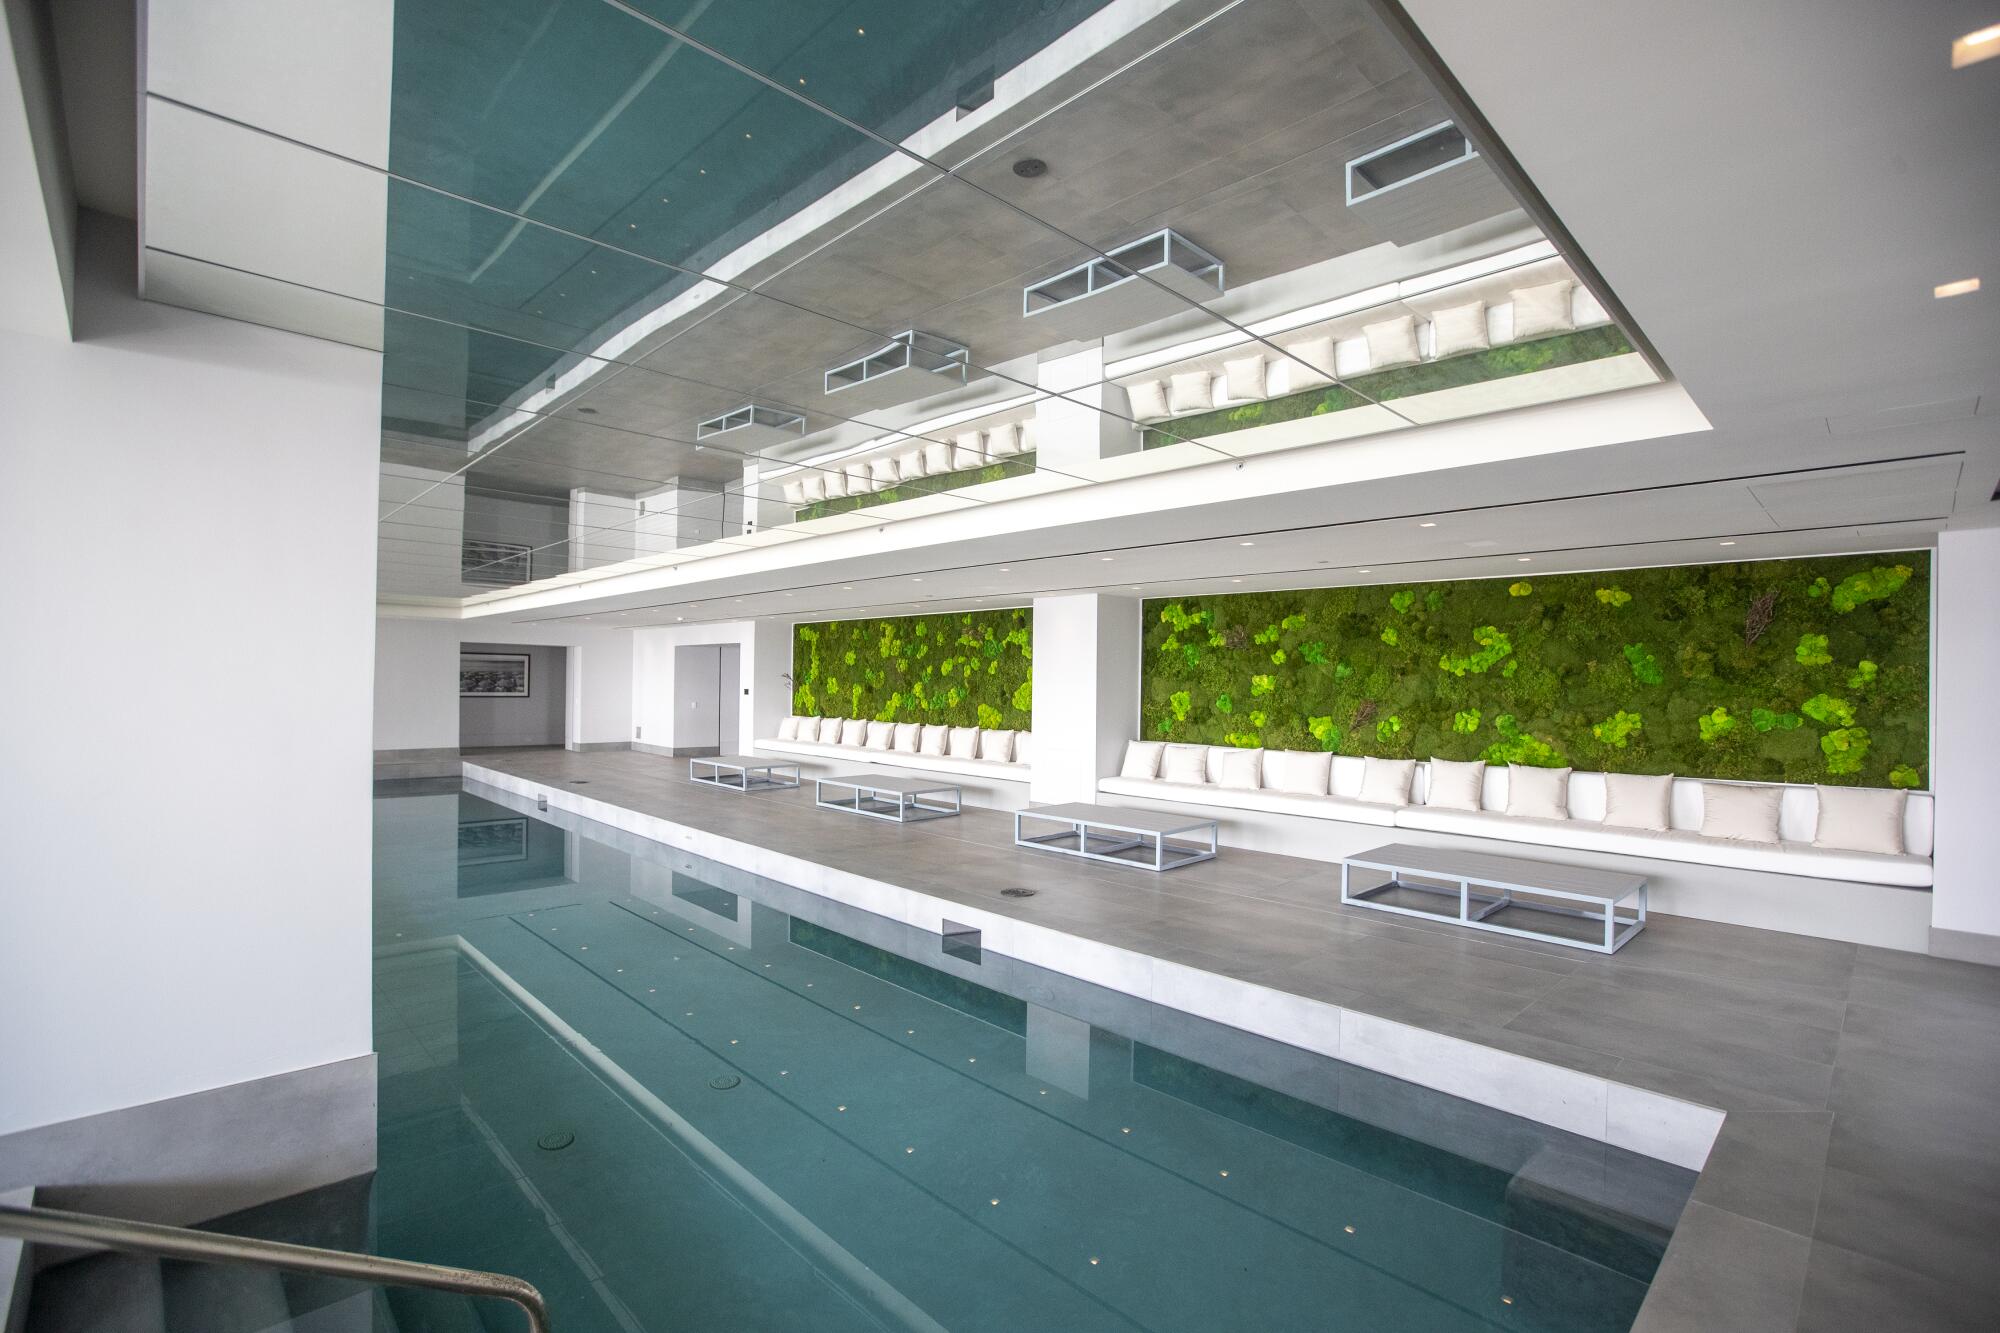 A view of the indoor pool and living wall at The One.